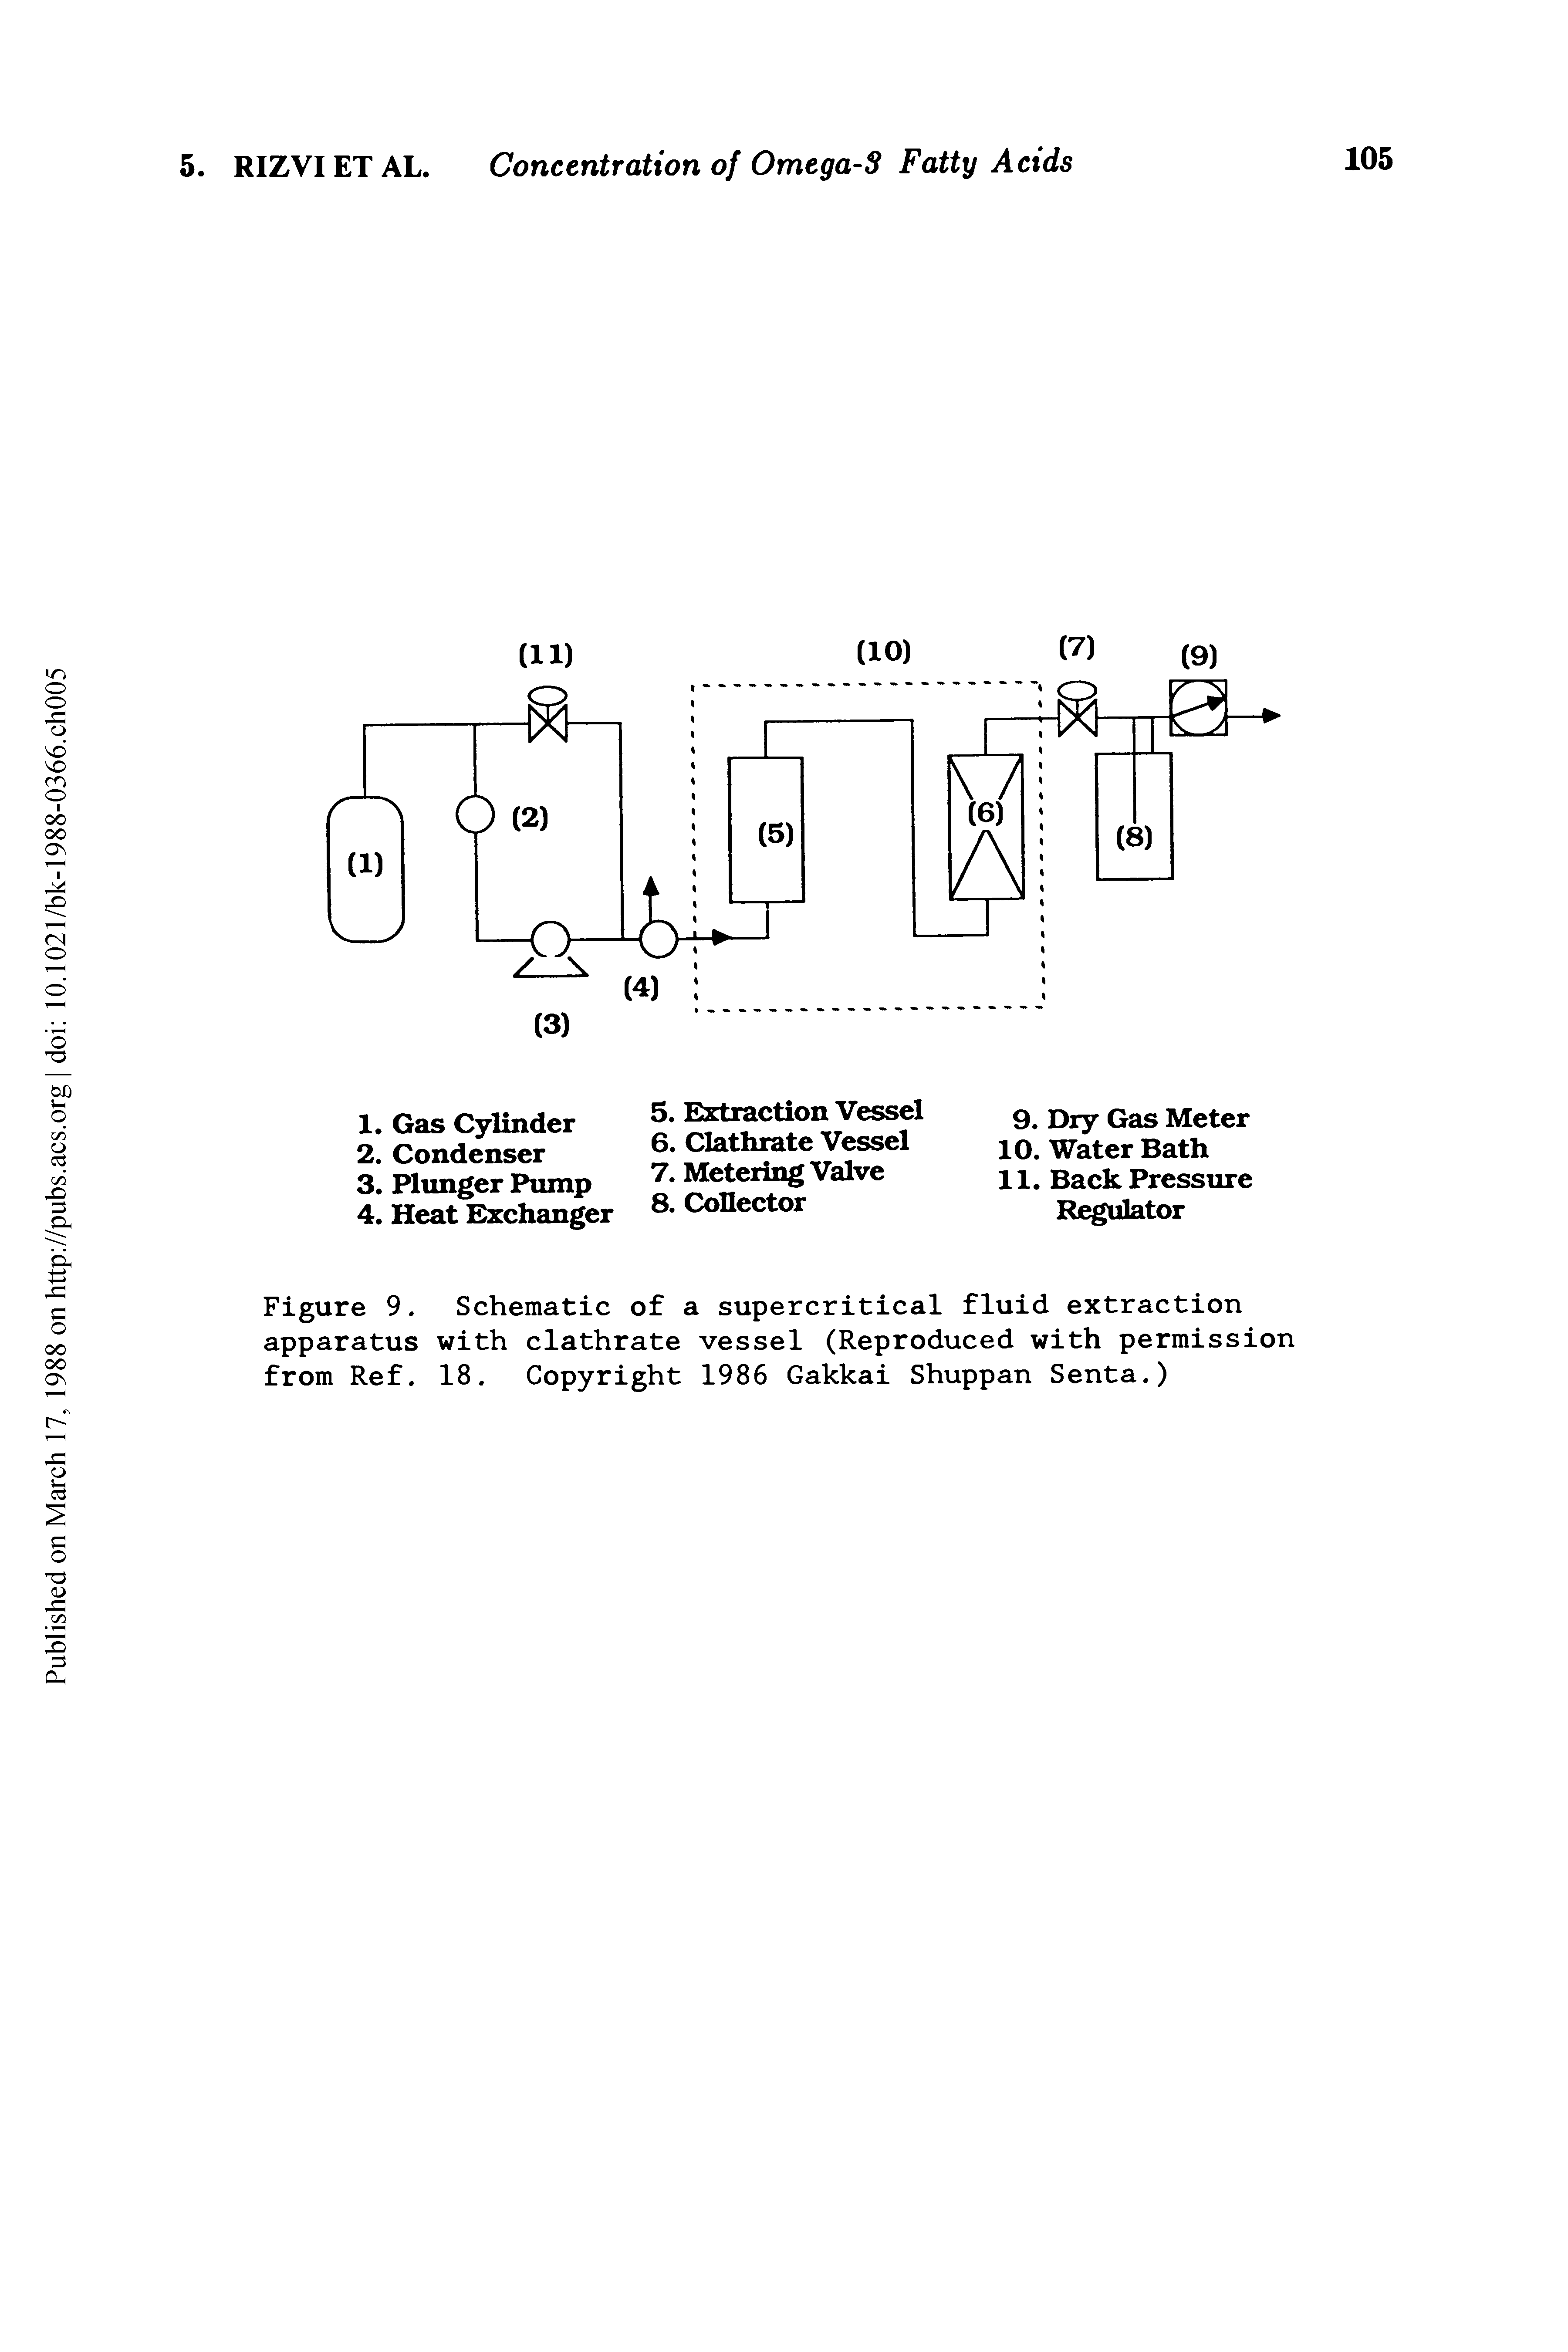 Figure 9. Schematic of a supercritical fluid extraction apparatus with clathrate vessel (Reproduced with permission from Ref. 18. Copyright 1986 Gakkai Shuppan Senta.)...